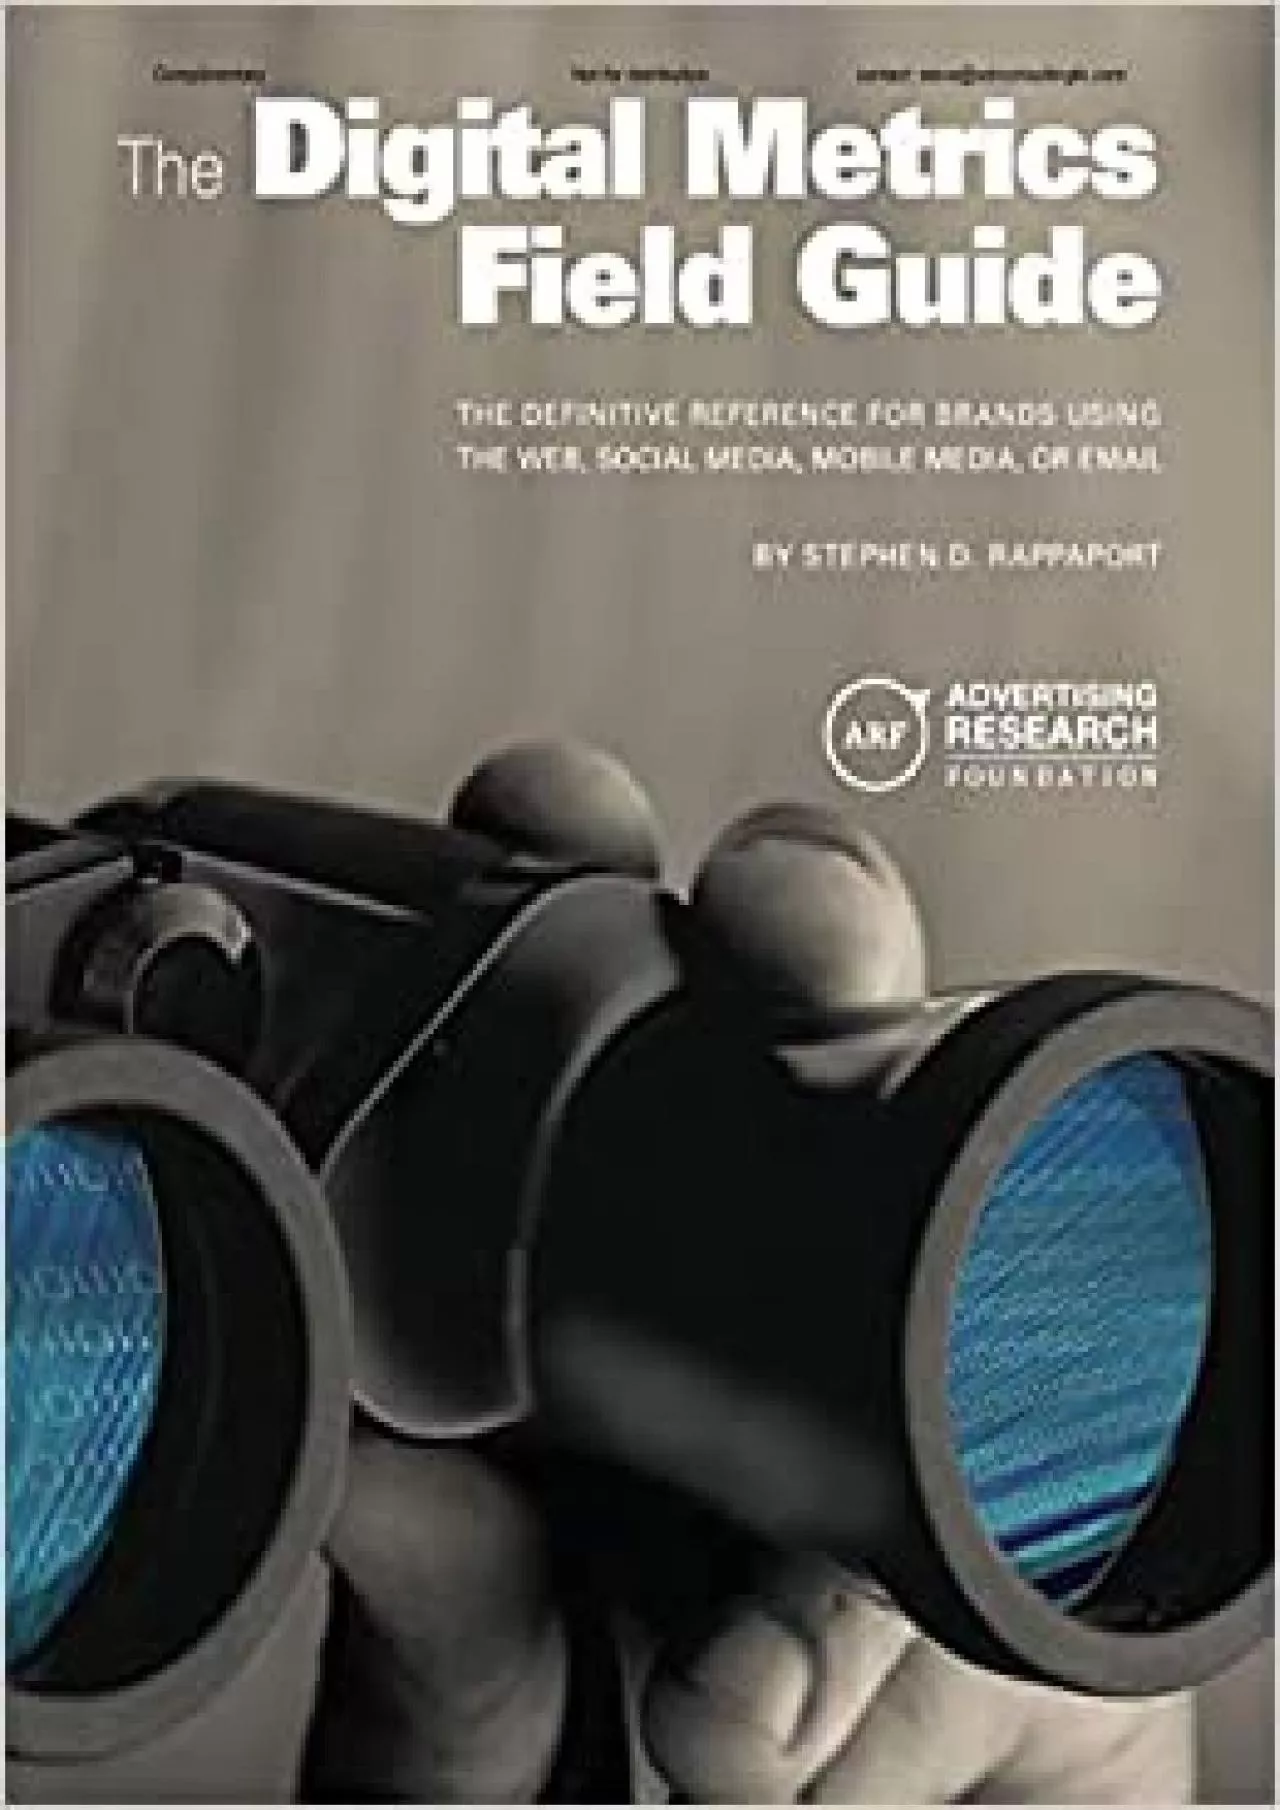 The Digital Metrics Field Guide The Definitive Reference for Brands Using the Web, Social